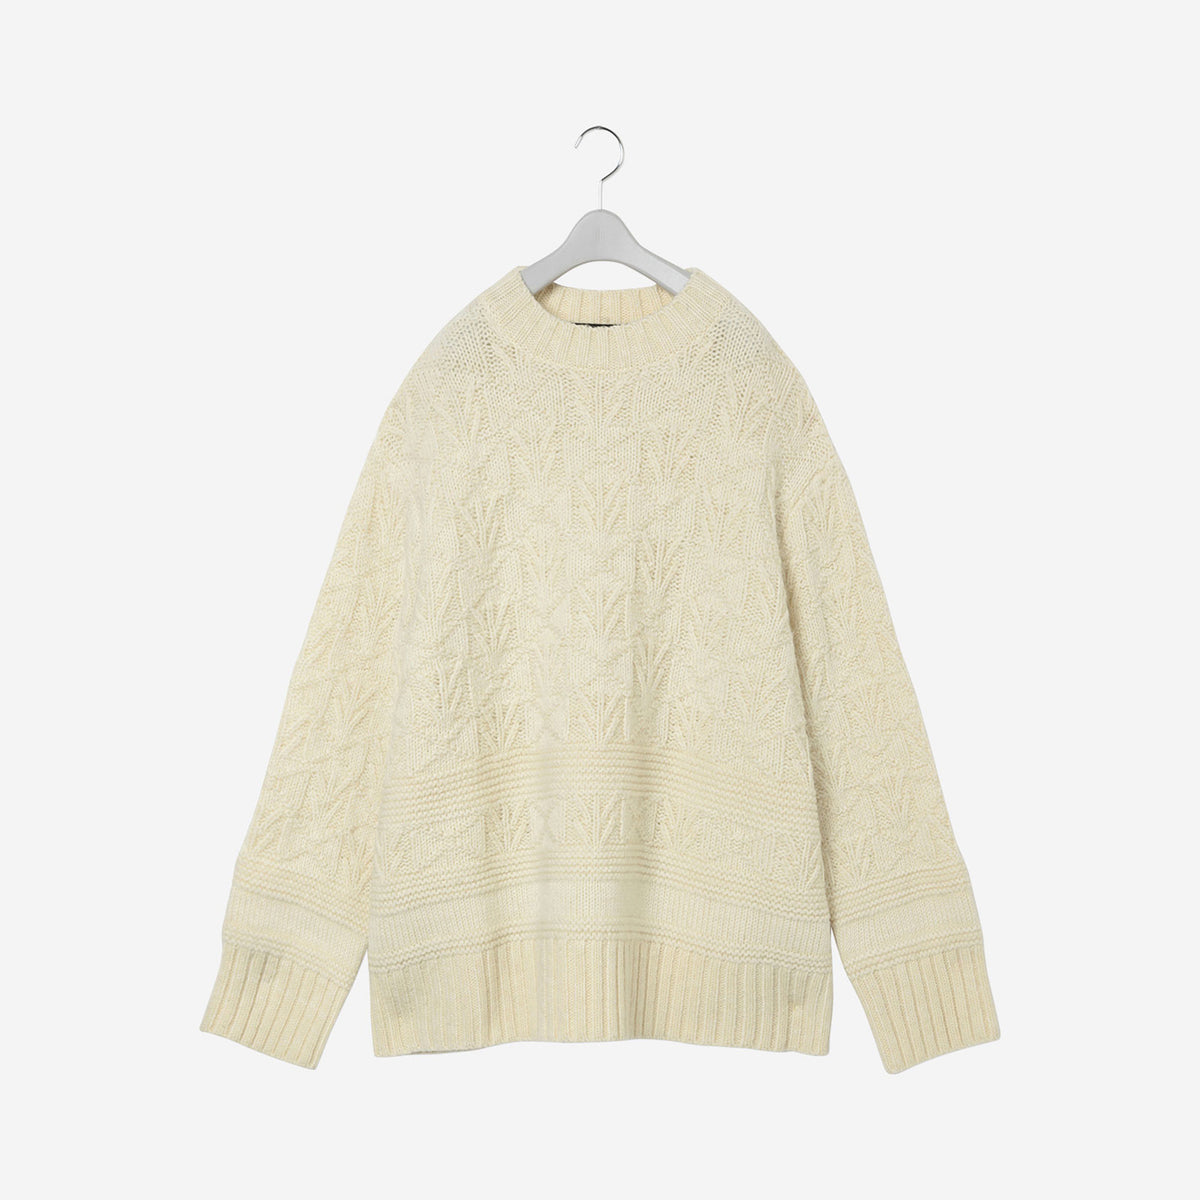 Hunting Oversized Knit / white – th products